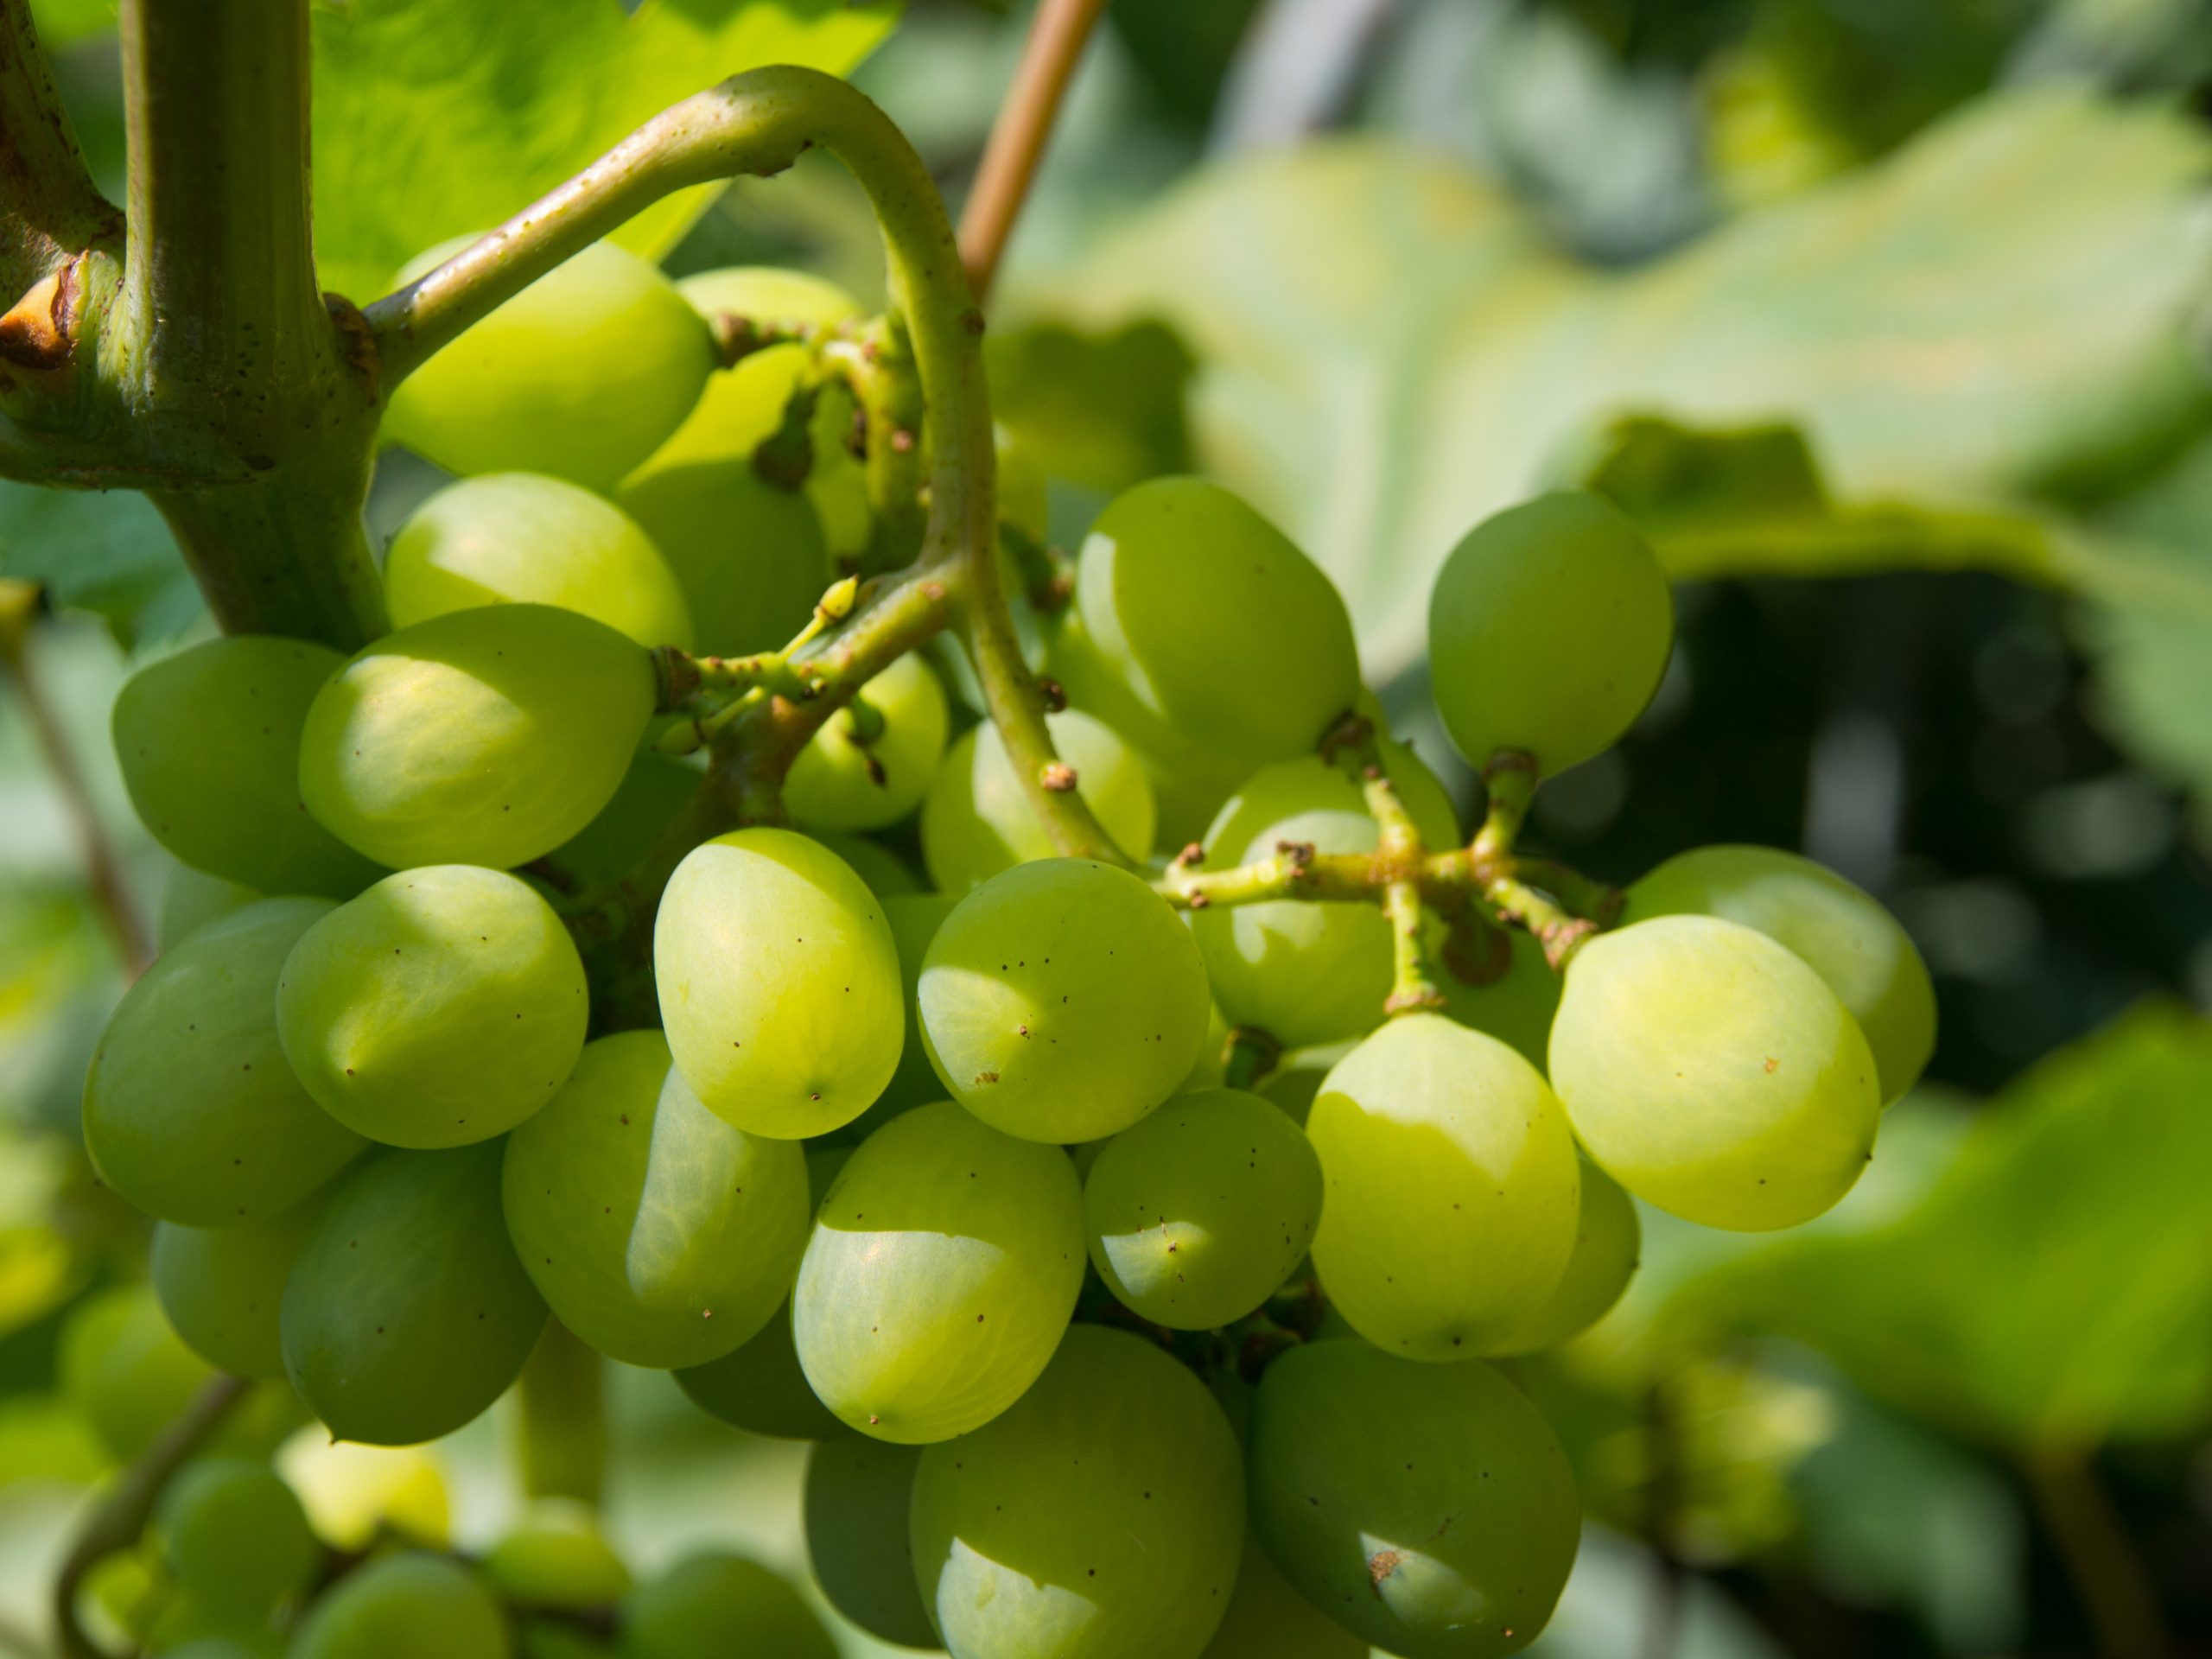 National fruit and veg wholesaler Perfection Fresh has acquired a major table grapes operation as part of an ongoing push to diversify.